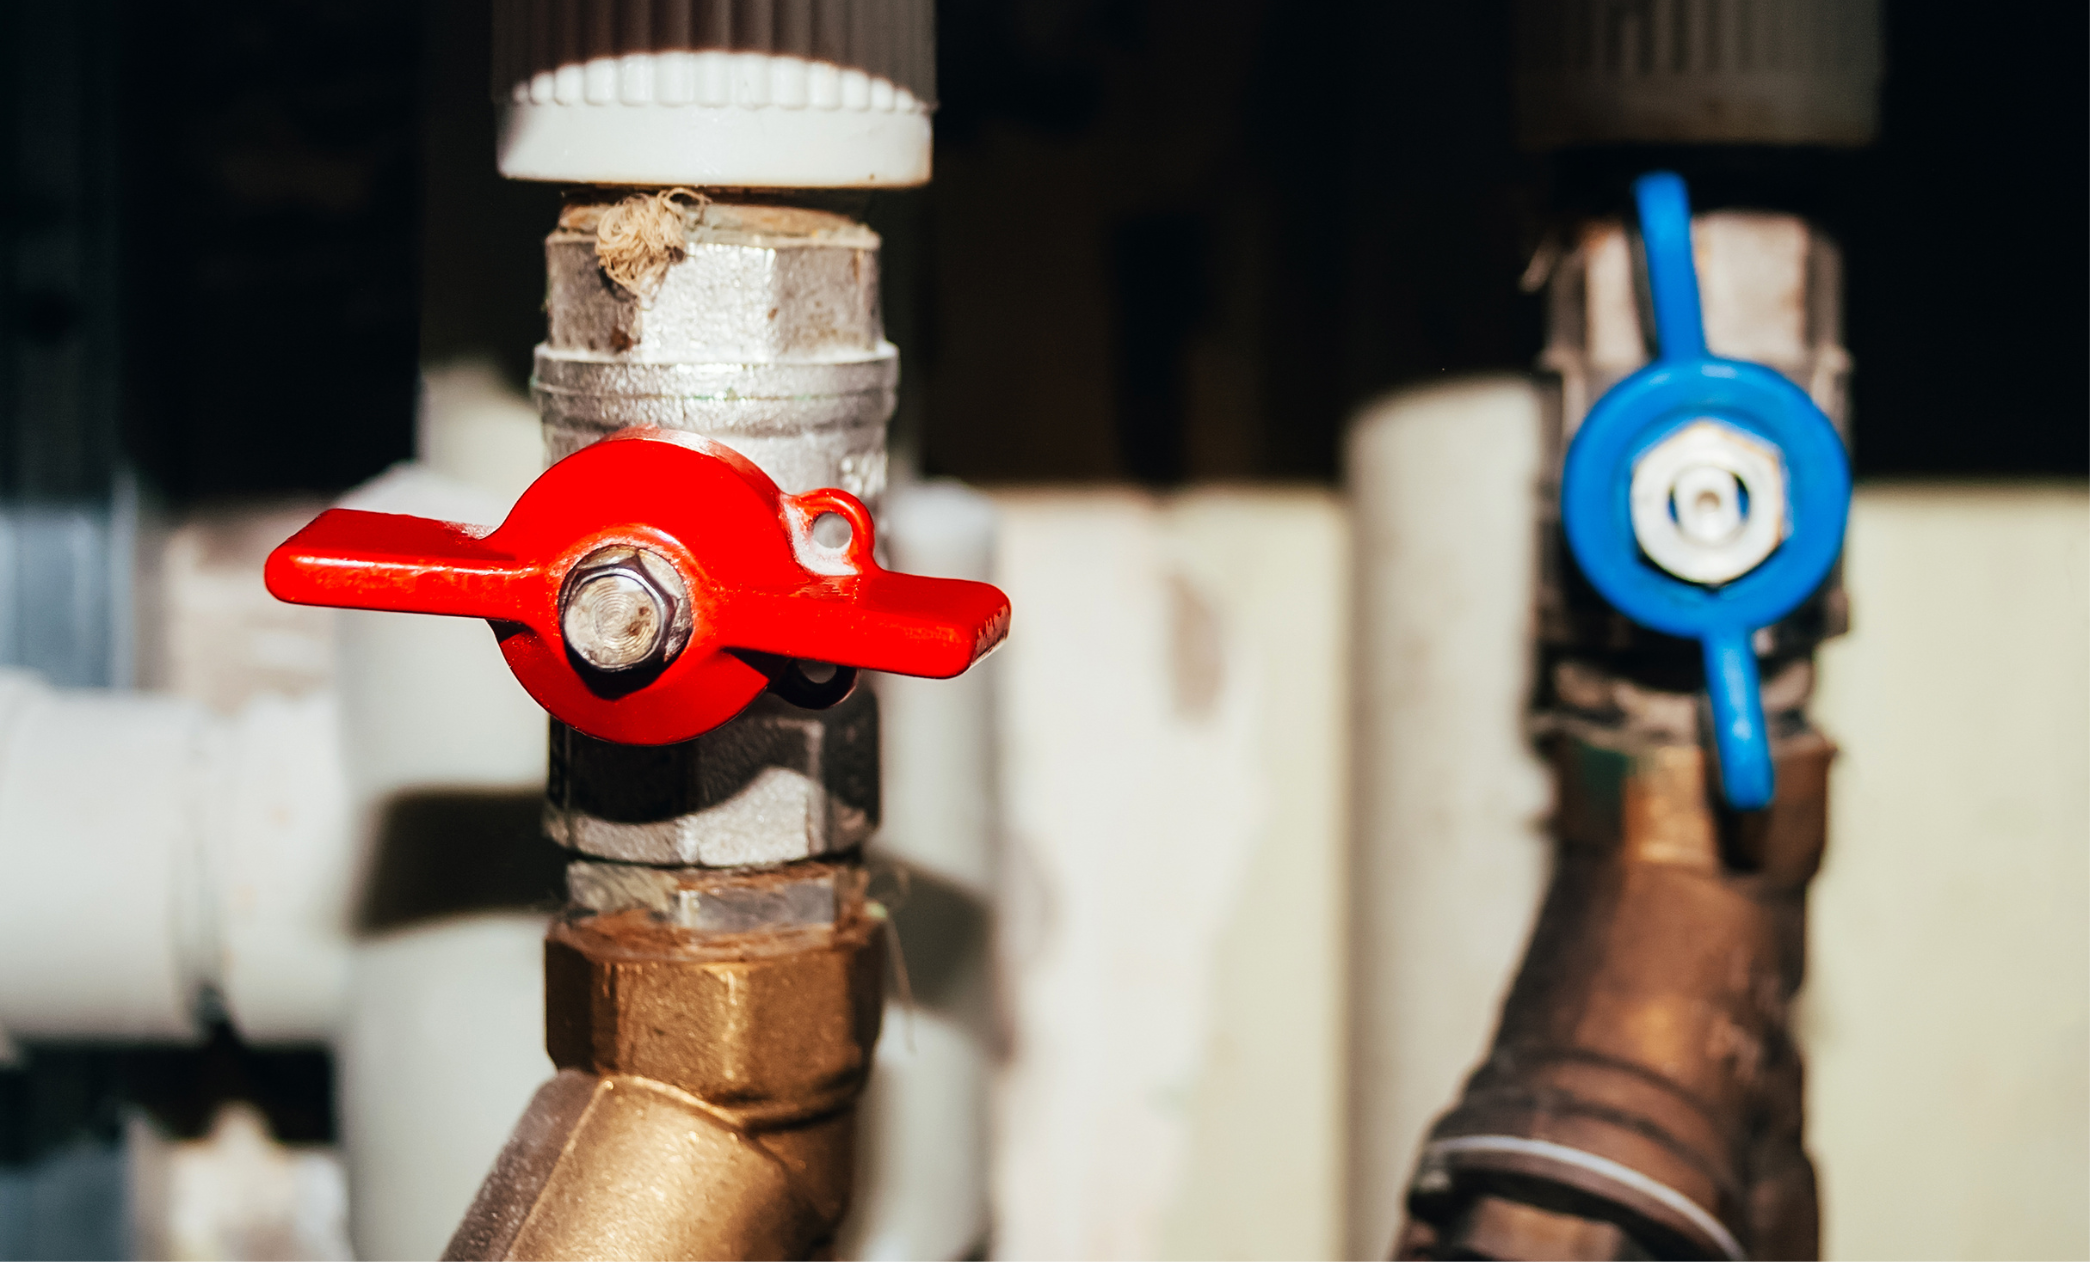 Two valves on pipes with hot and cold water